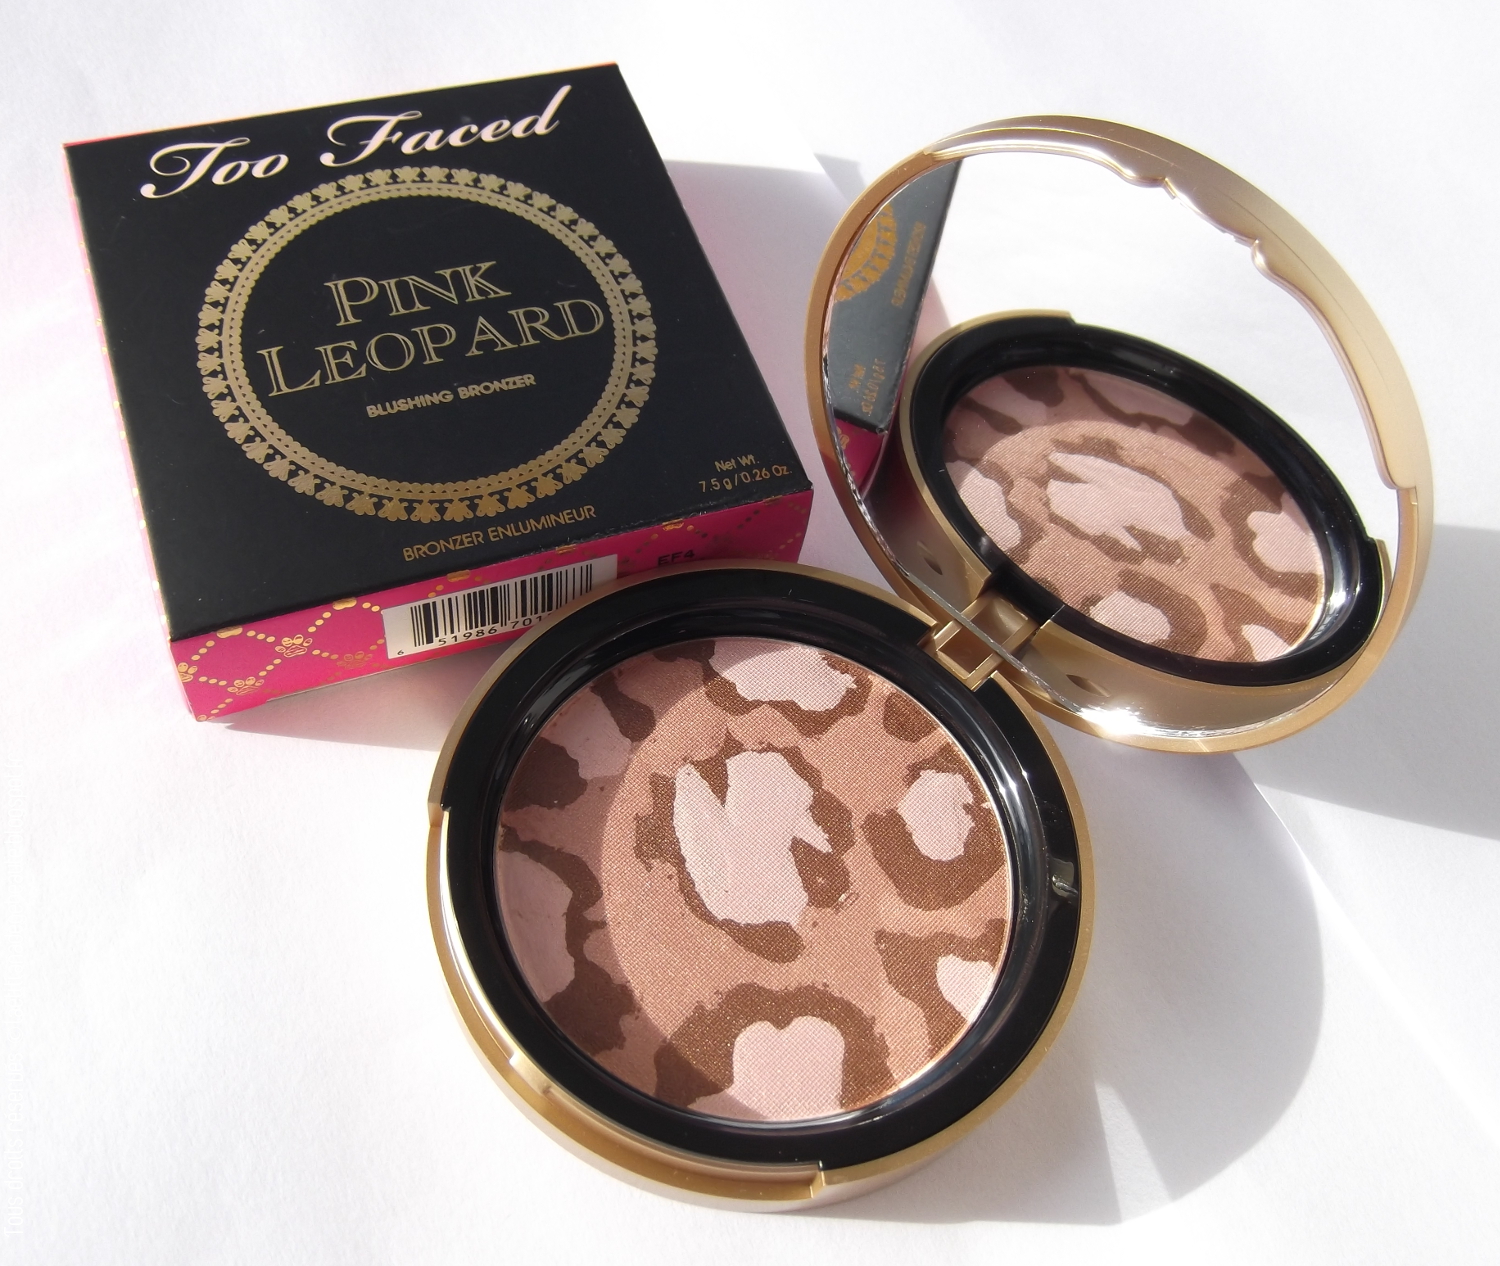 too faced pink leopard review